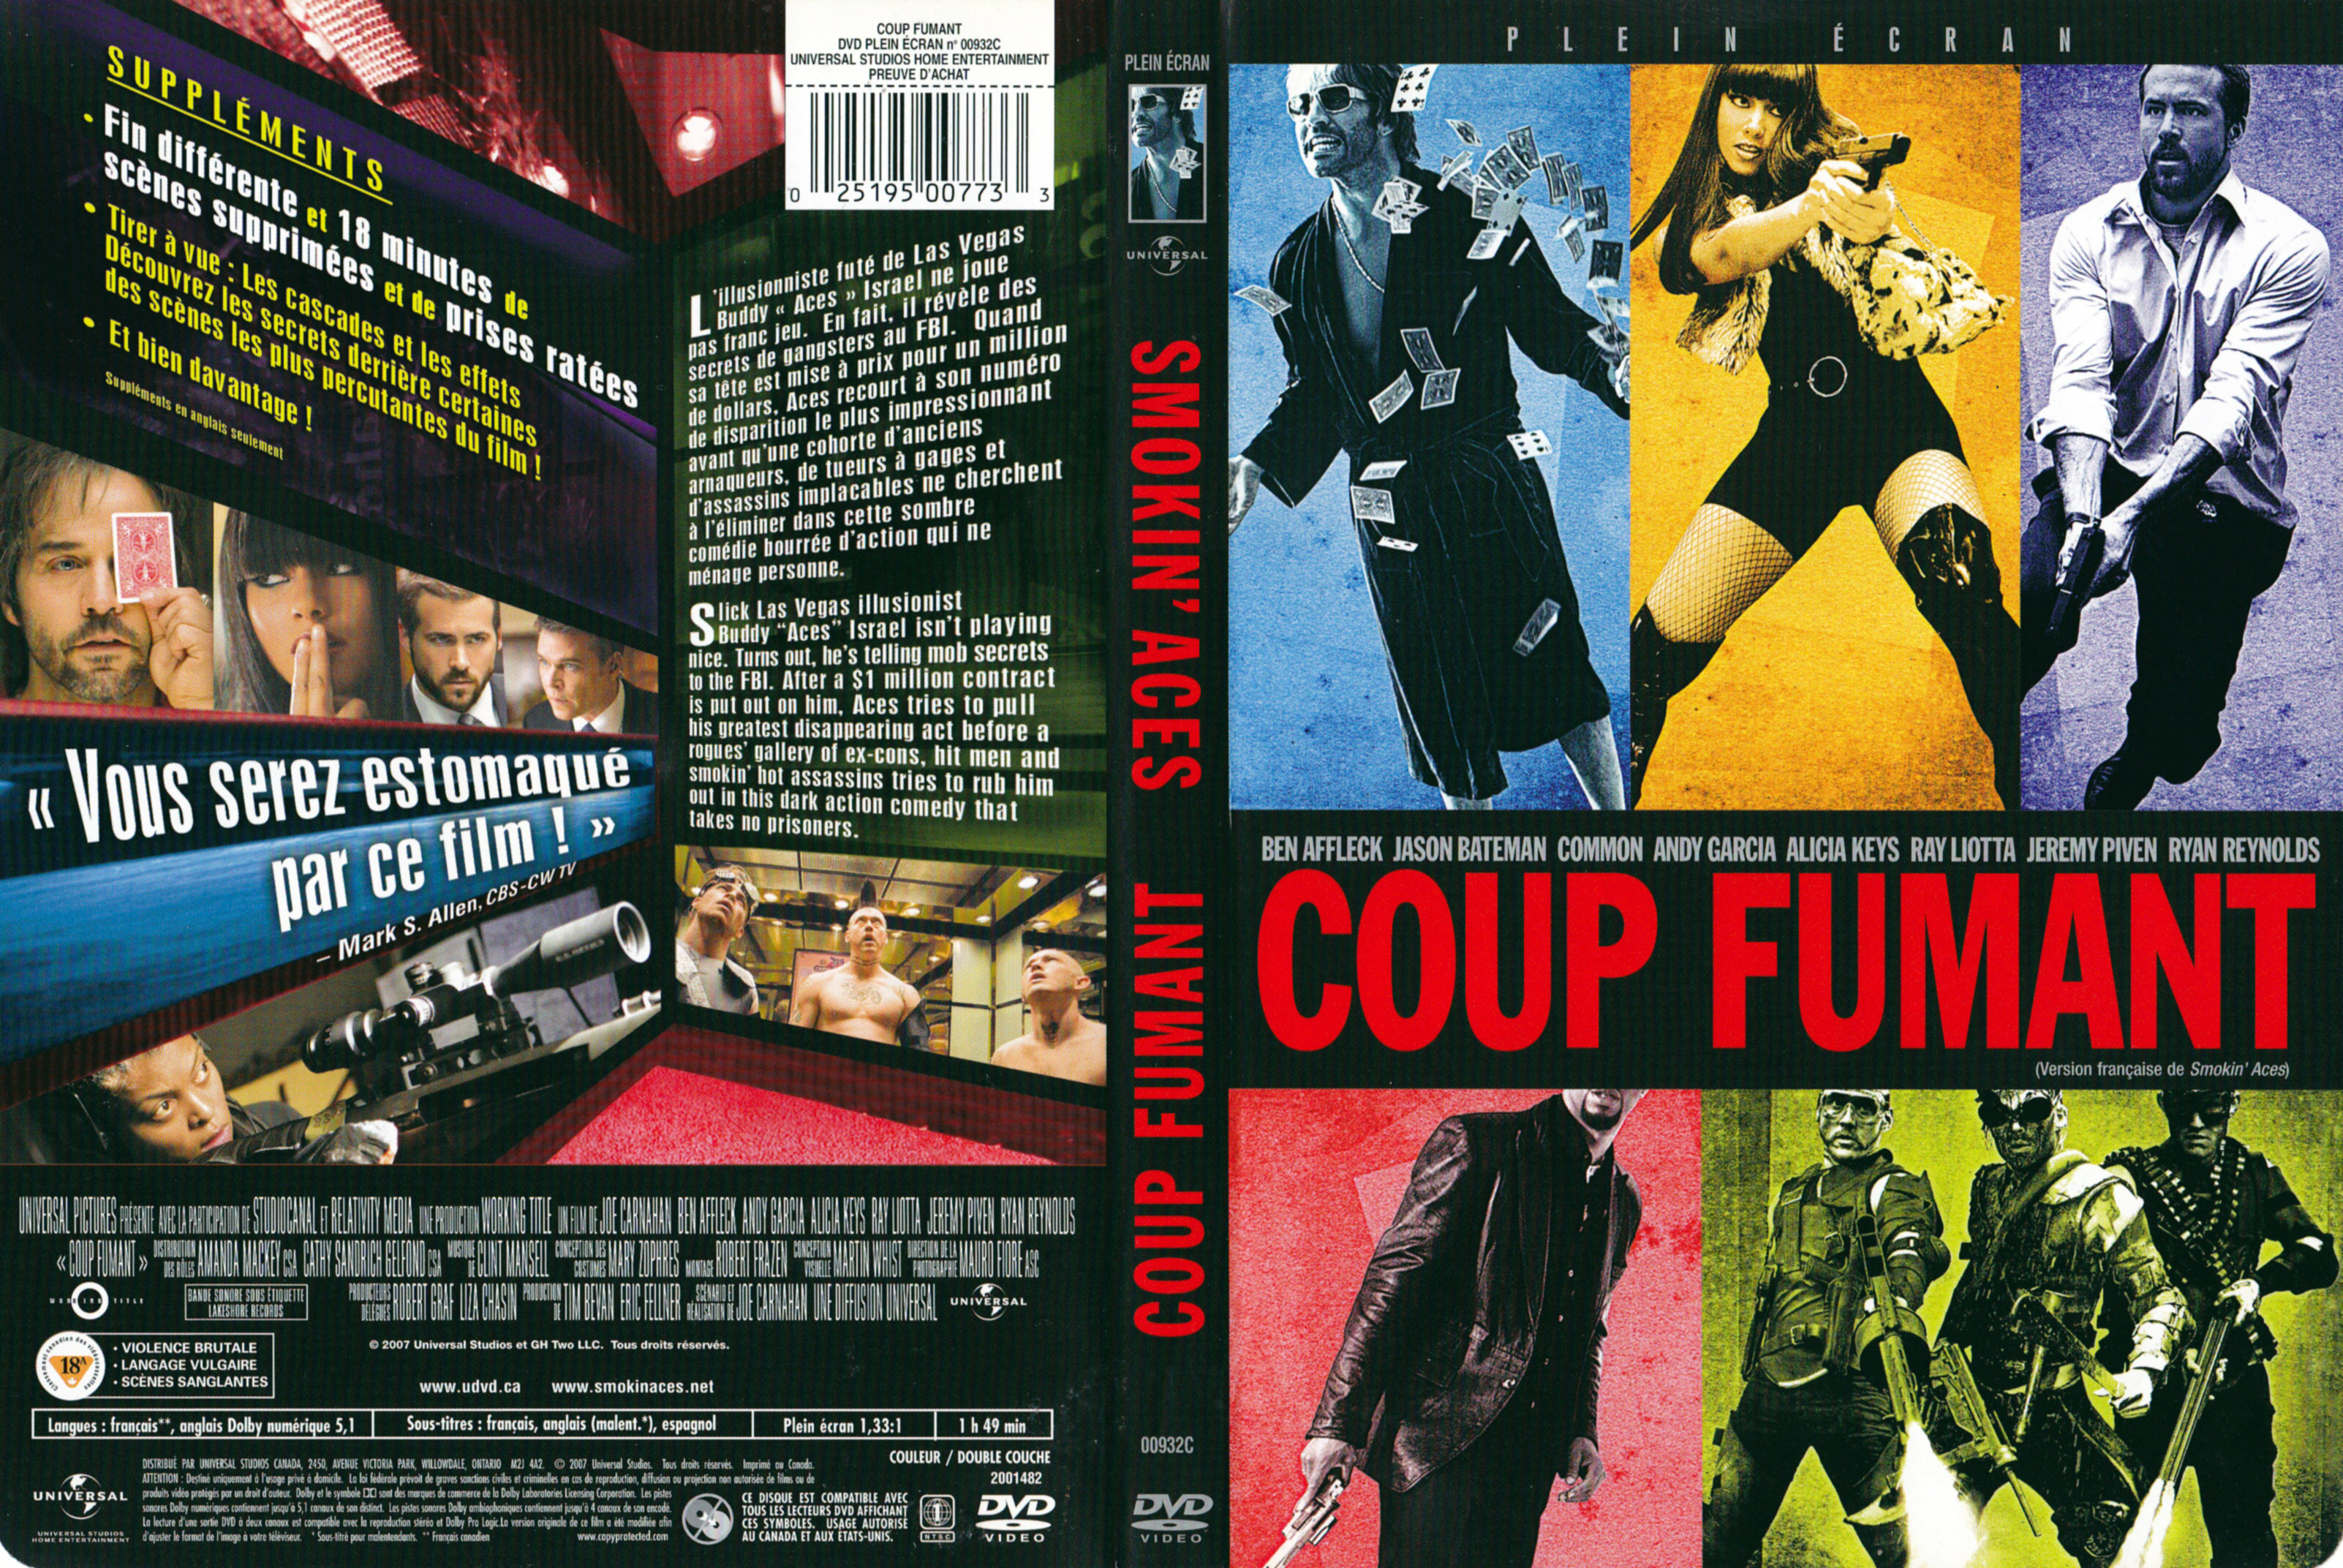 Jaquette DVD Coup fumant - Smokin aces (Canadienne)